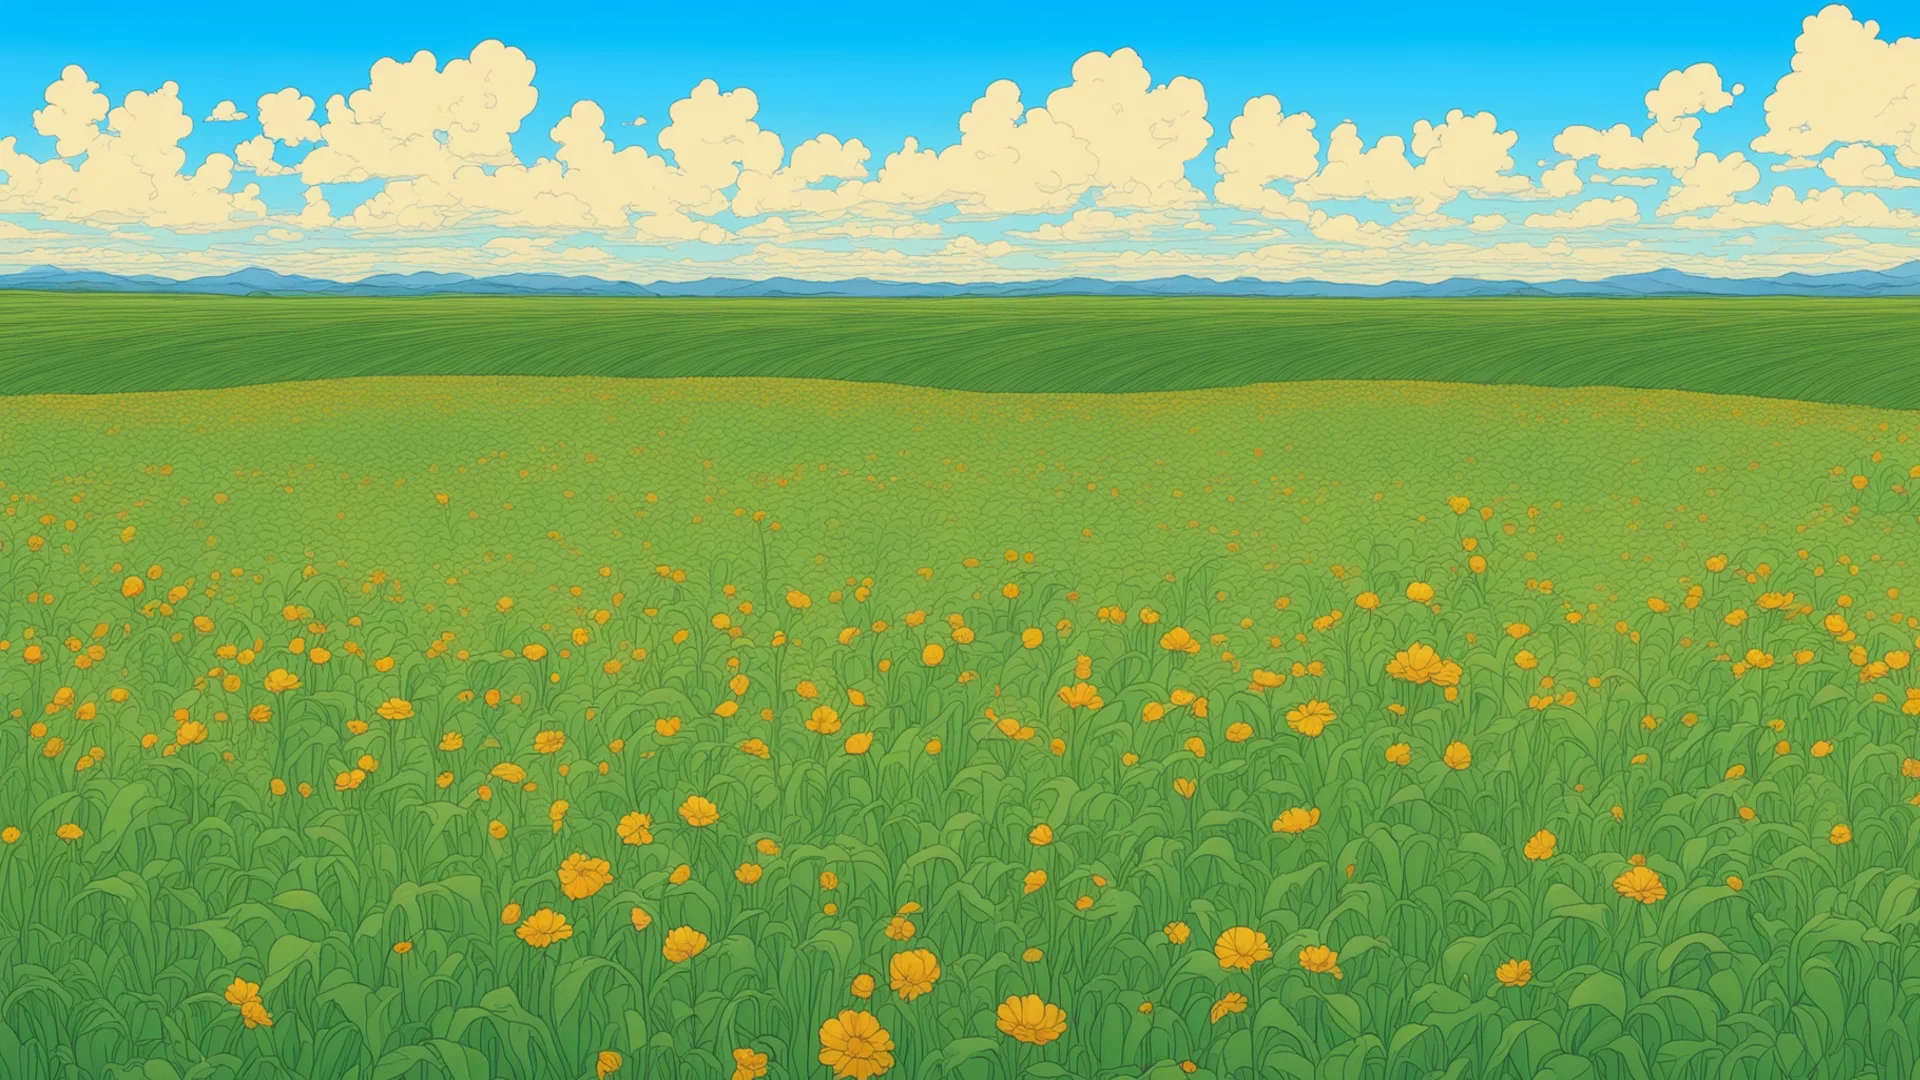 a field of crops growing designed by moebius ghibli ian wallpaper amazing awesome portrait 2 wide